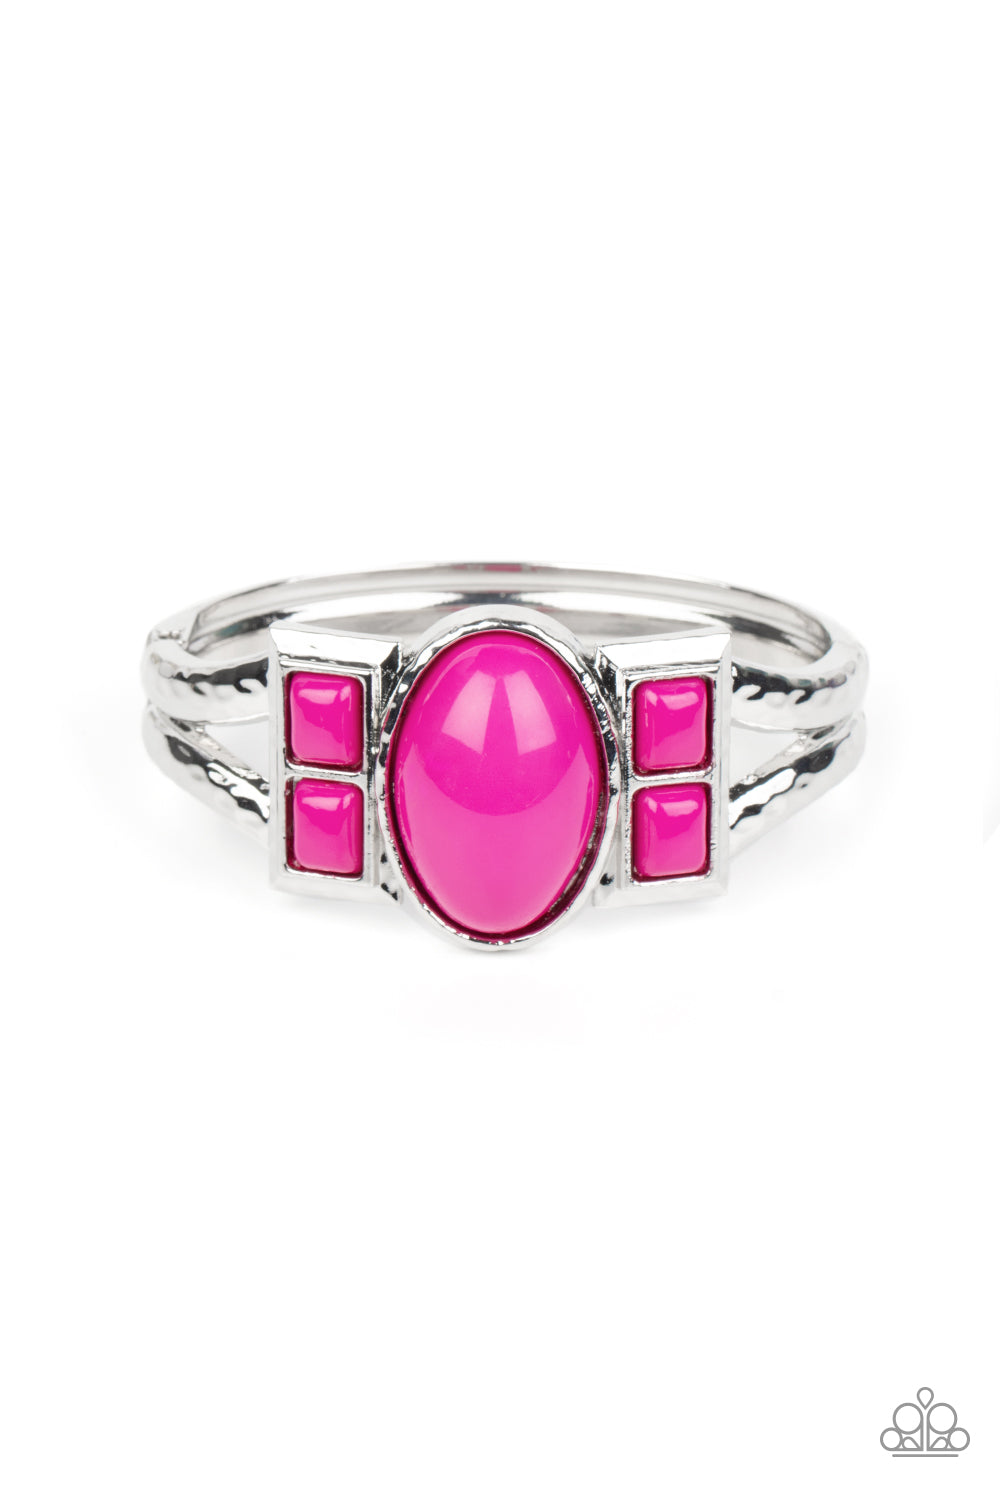 A Touch of Tiki - Pink and Silver Hinged Bracelet